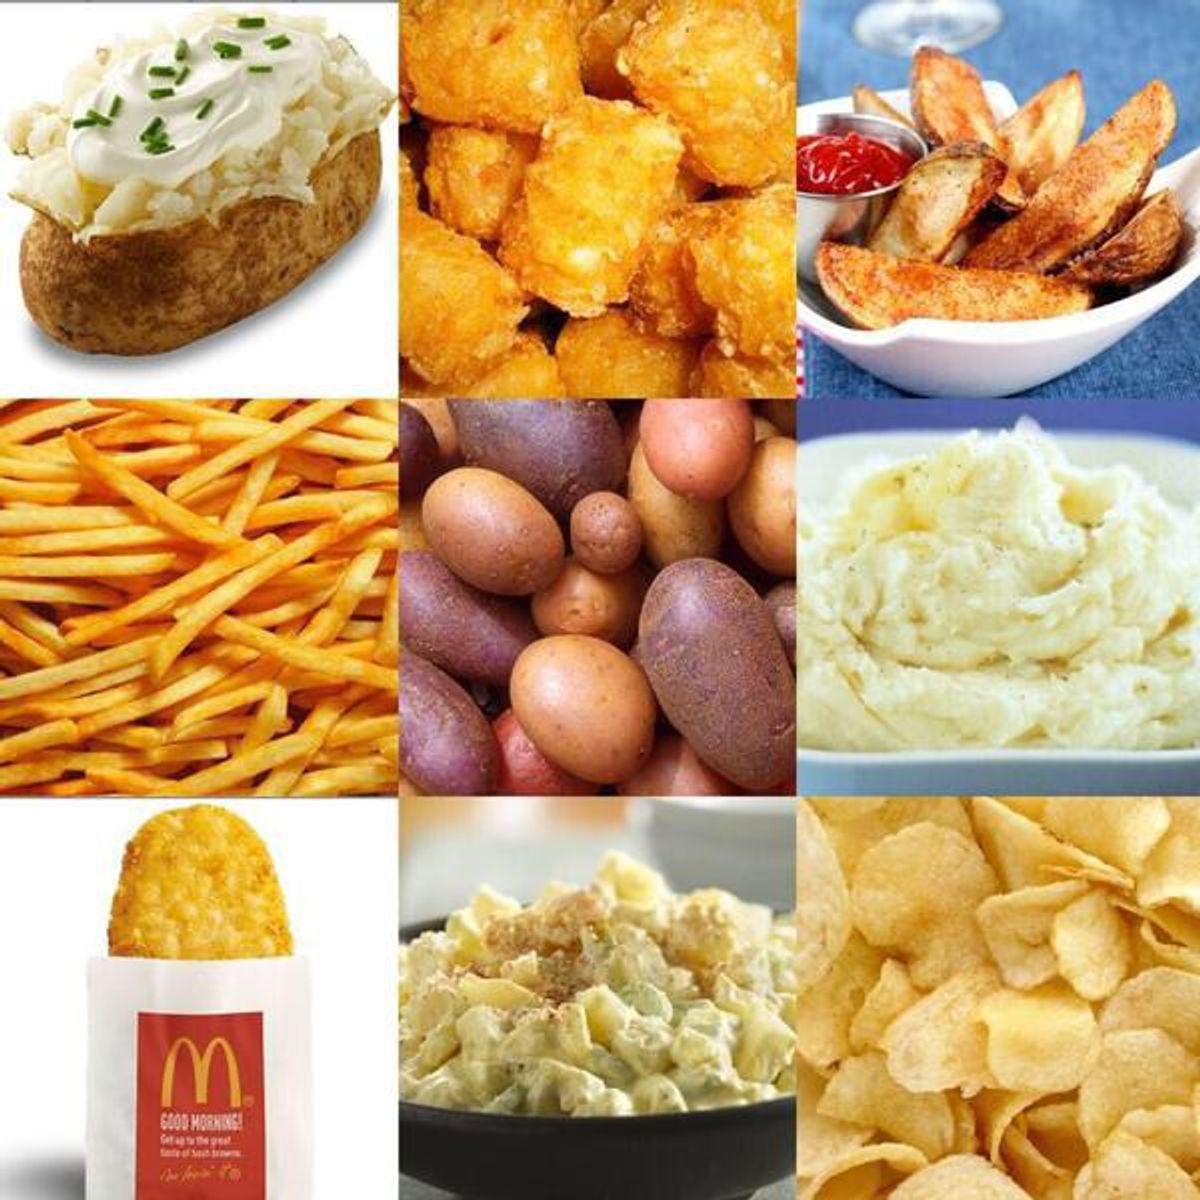 A visual depiction of different forms of potatoes